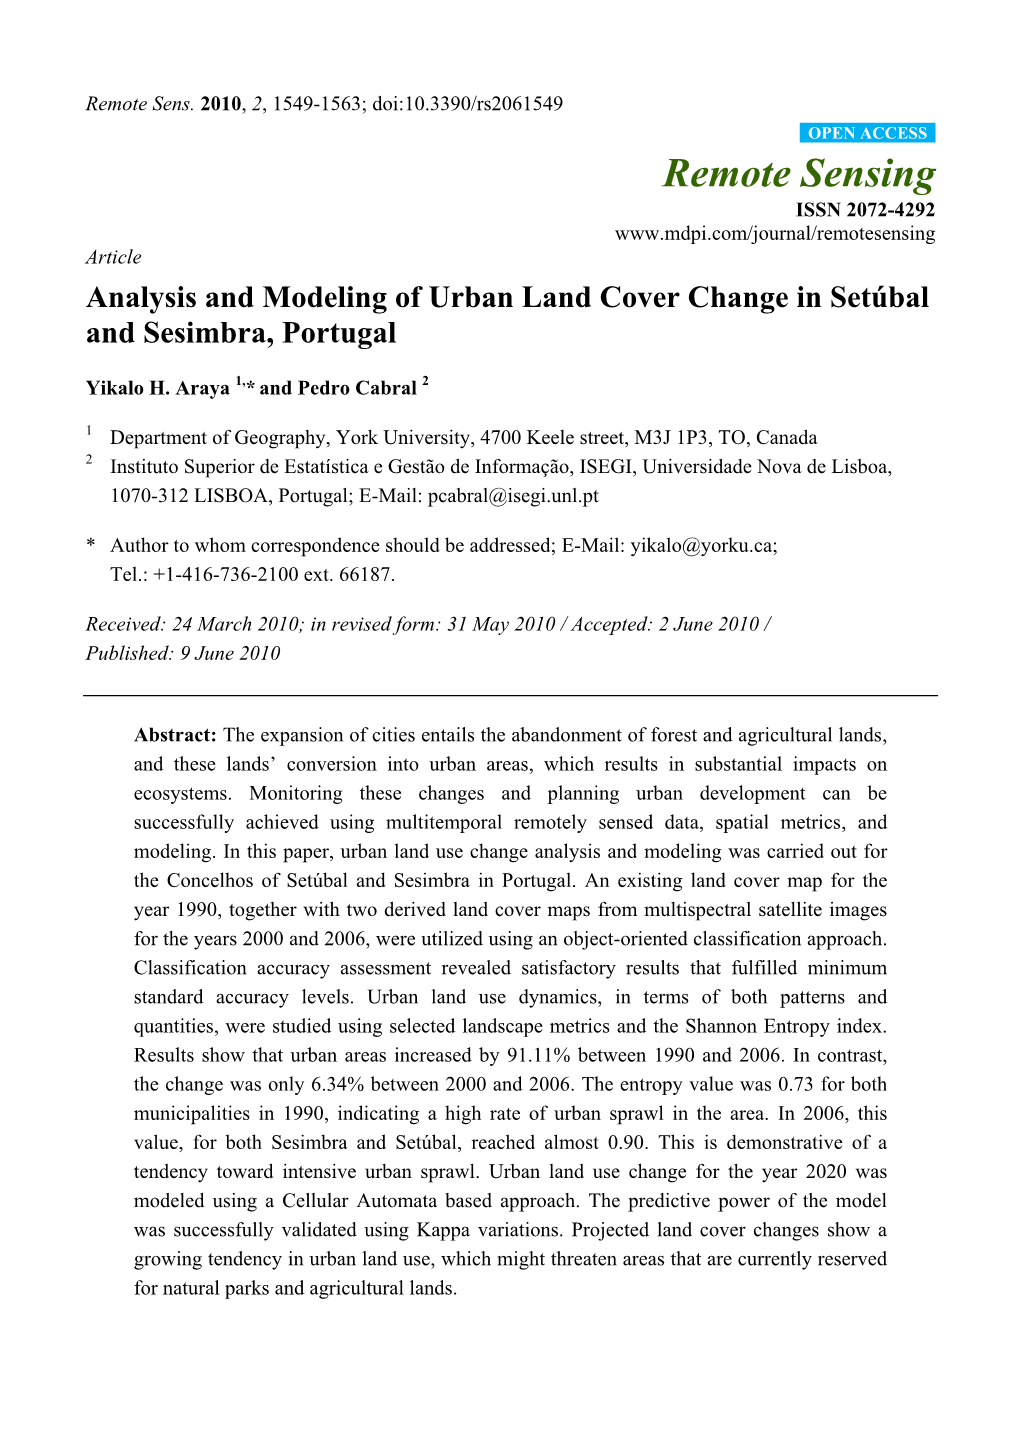 Analysis and Modeling of Urban Land Cover Change in Setúbal and Sesimbra, Portugal